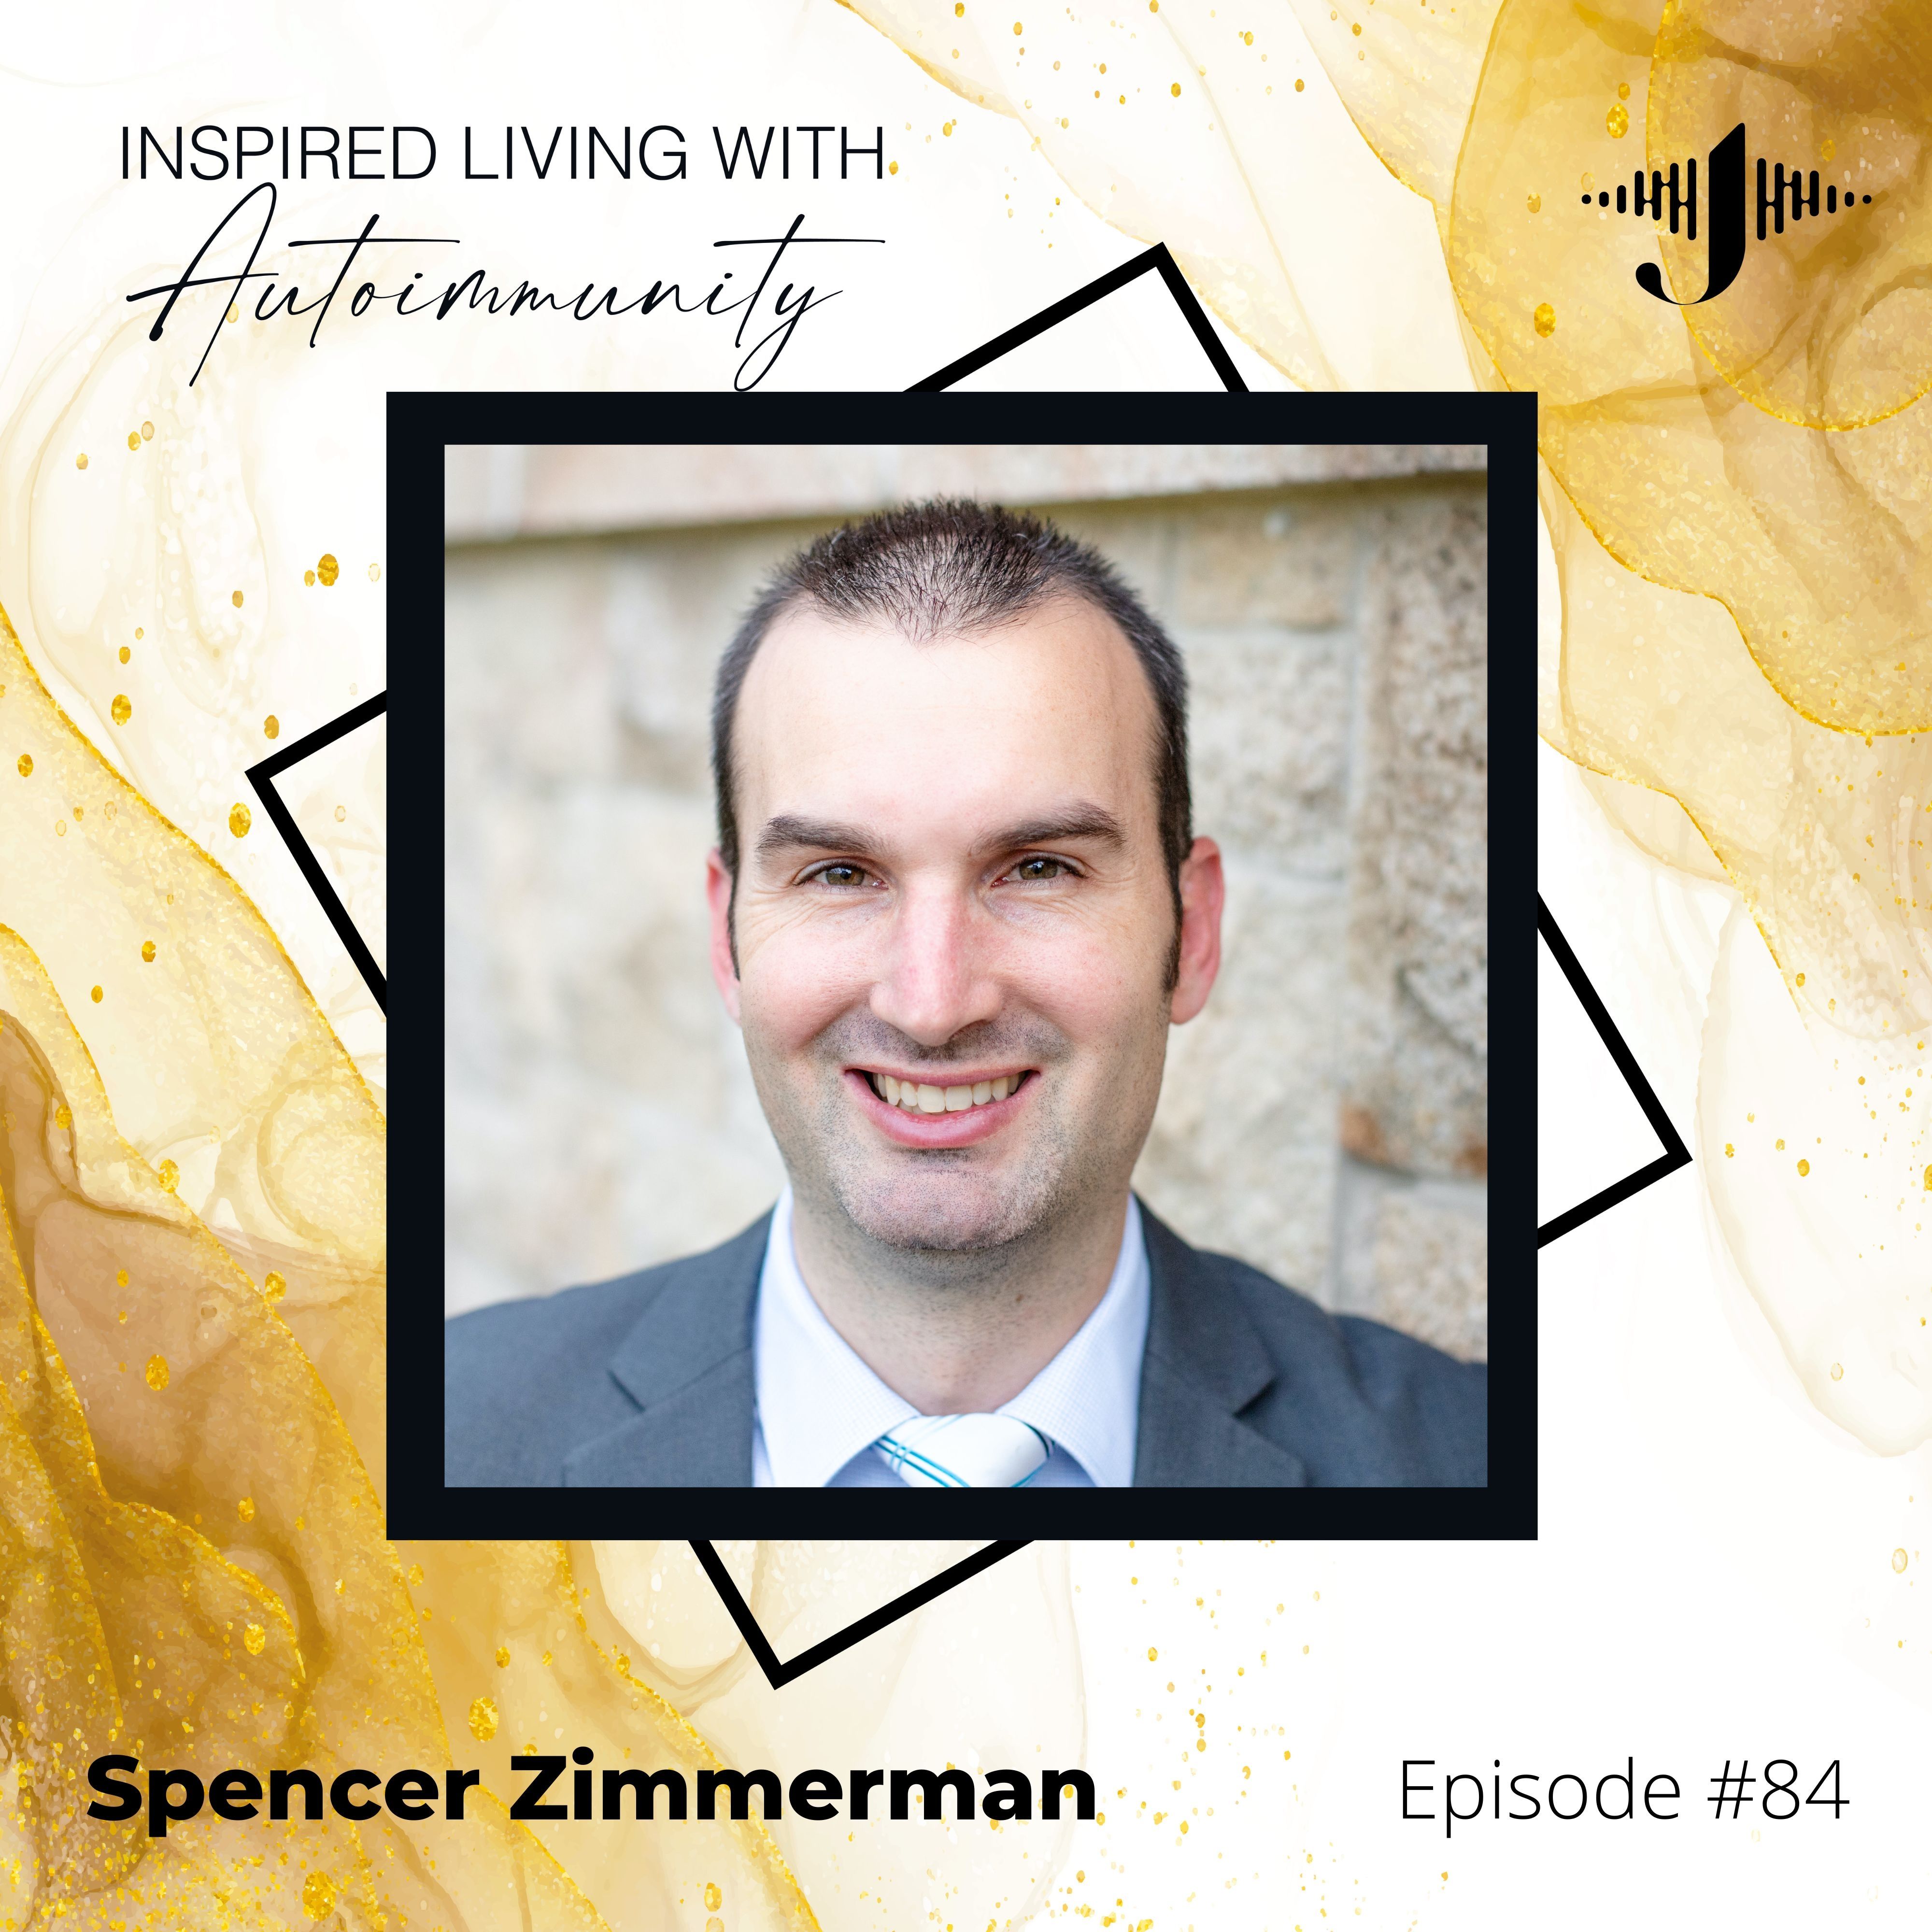 Spencer Zimmerman: Brain Trauma Effects: How They Change Your Brain-Body Connection and Health